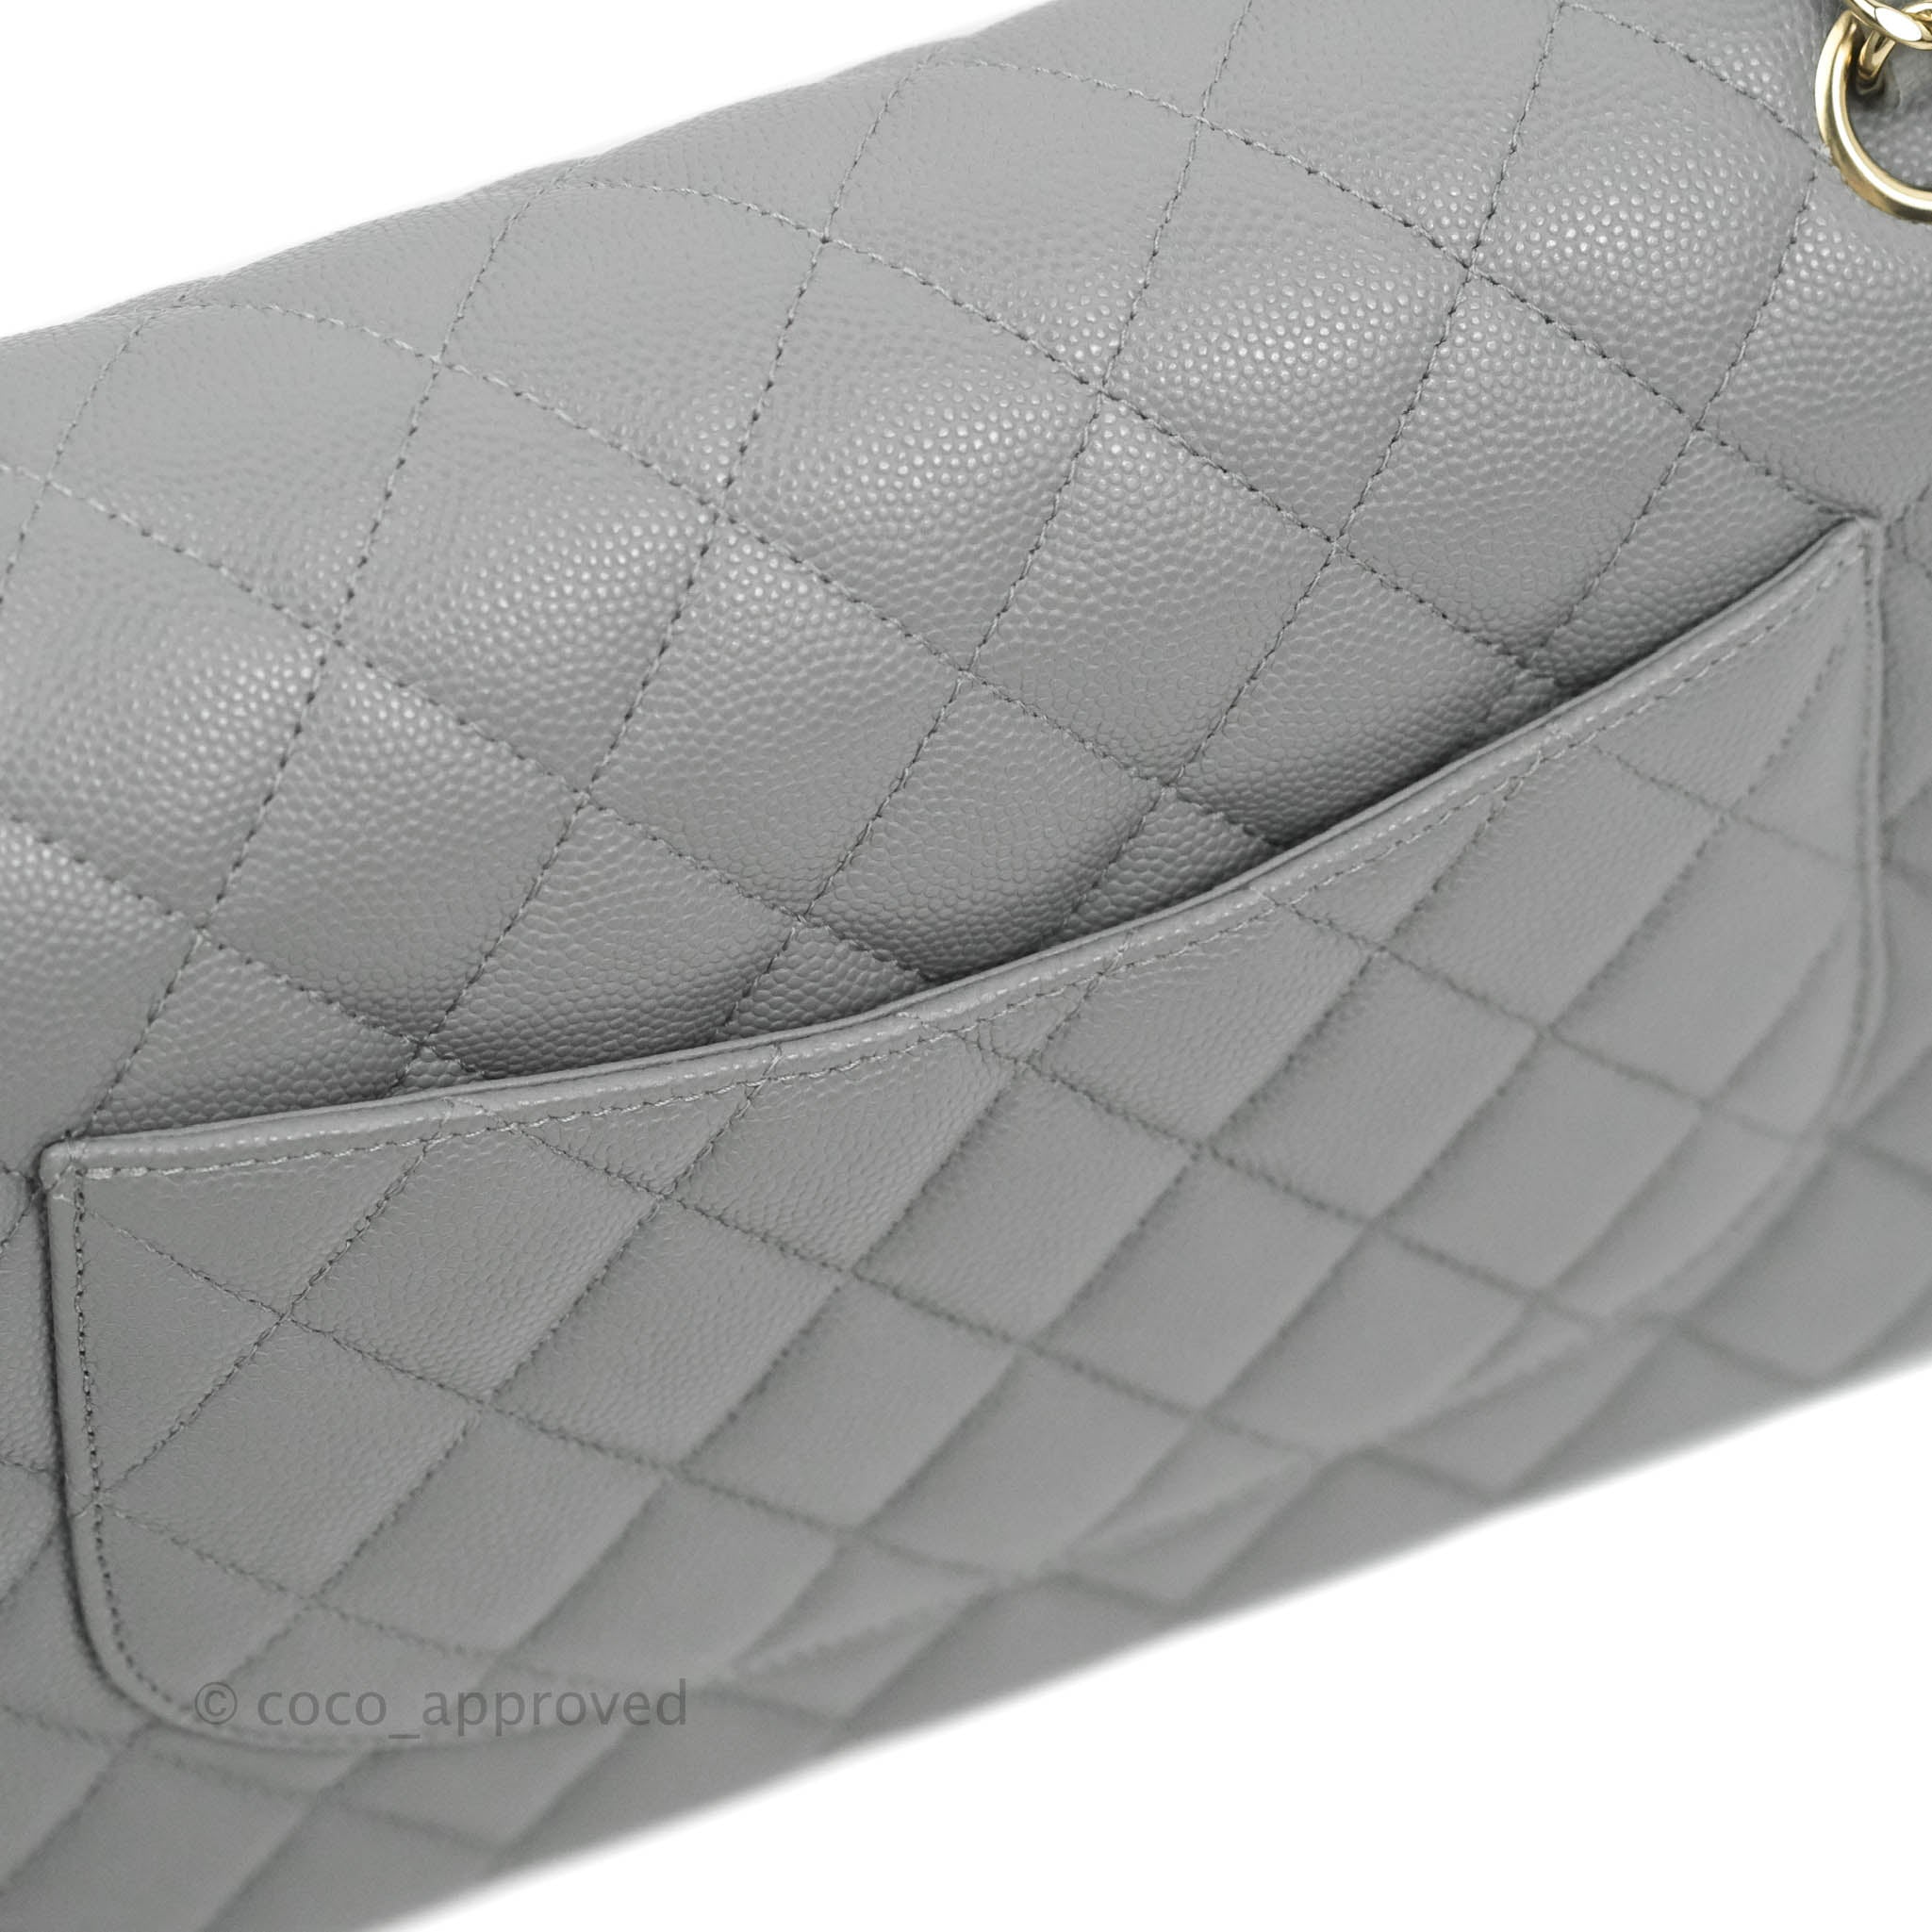 Chanel Classic M/L Medium Flap Quilted Grey Caviar Gold Hardware